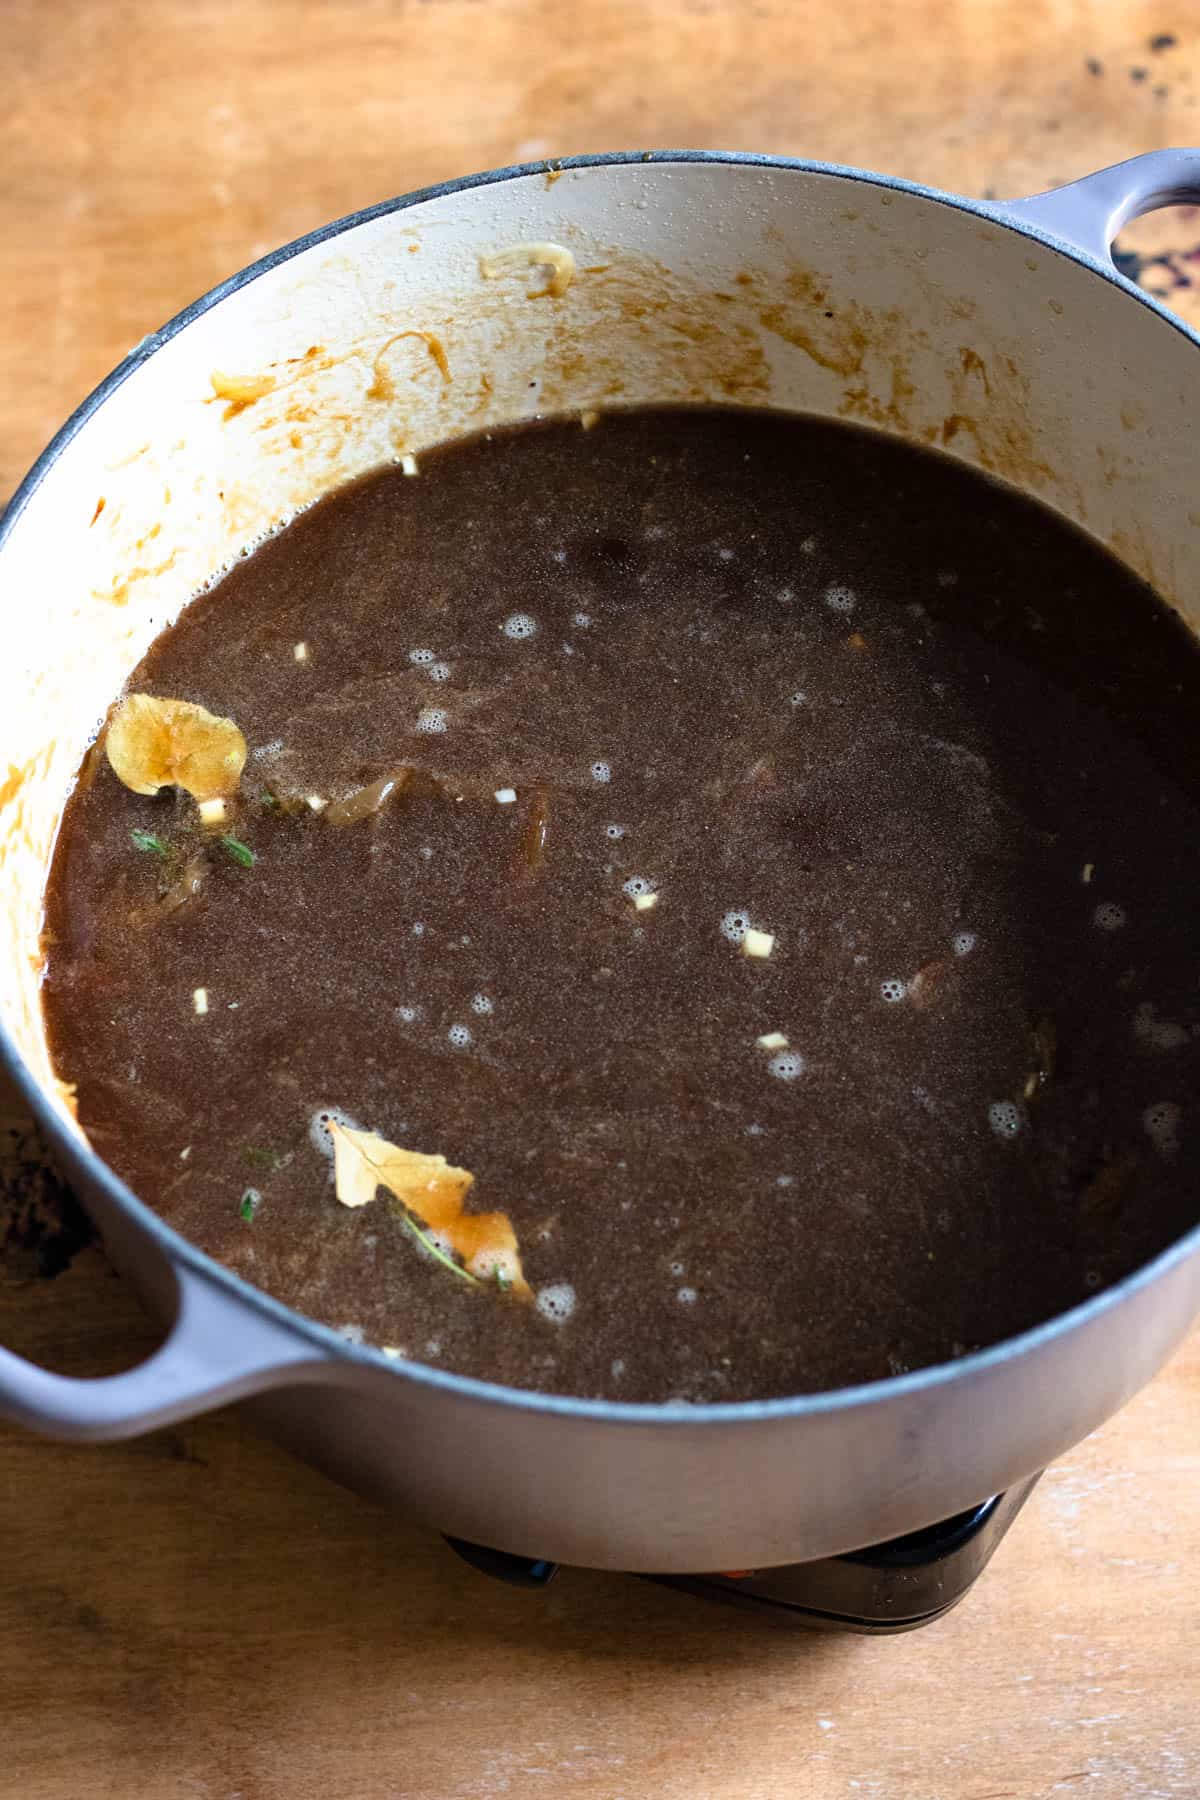 Broth and seasonings added to the caramelized onions in a Dutch oven to prepare for French onion soup.